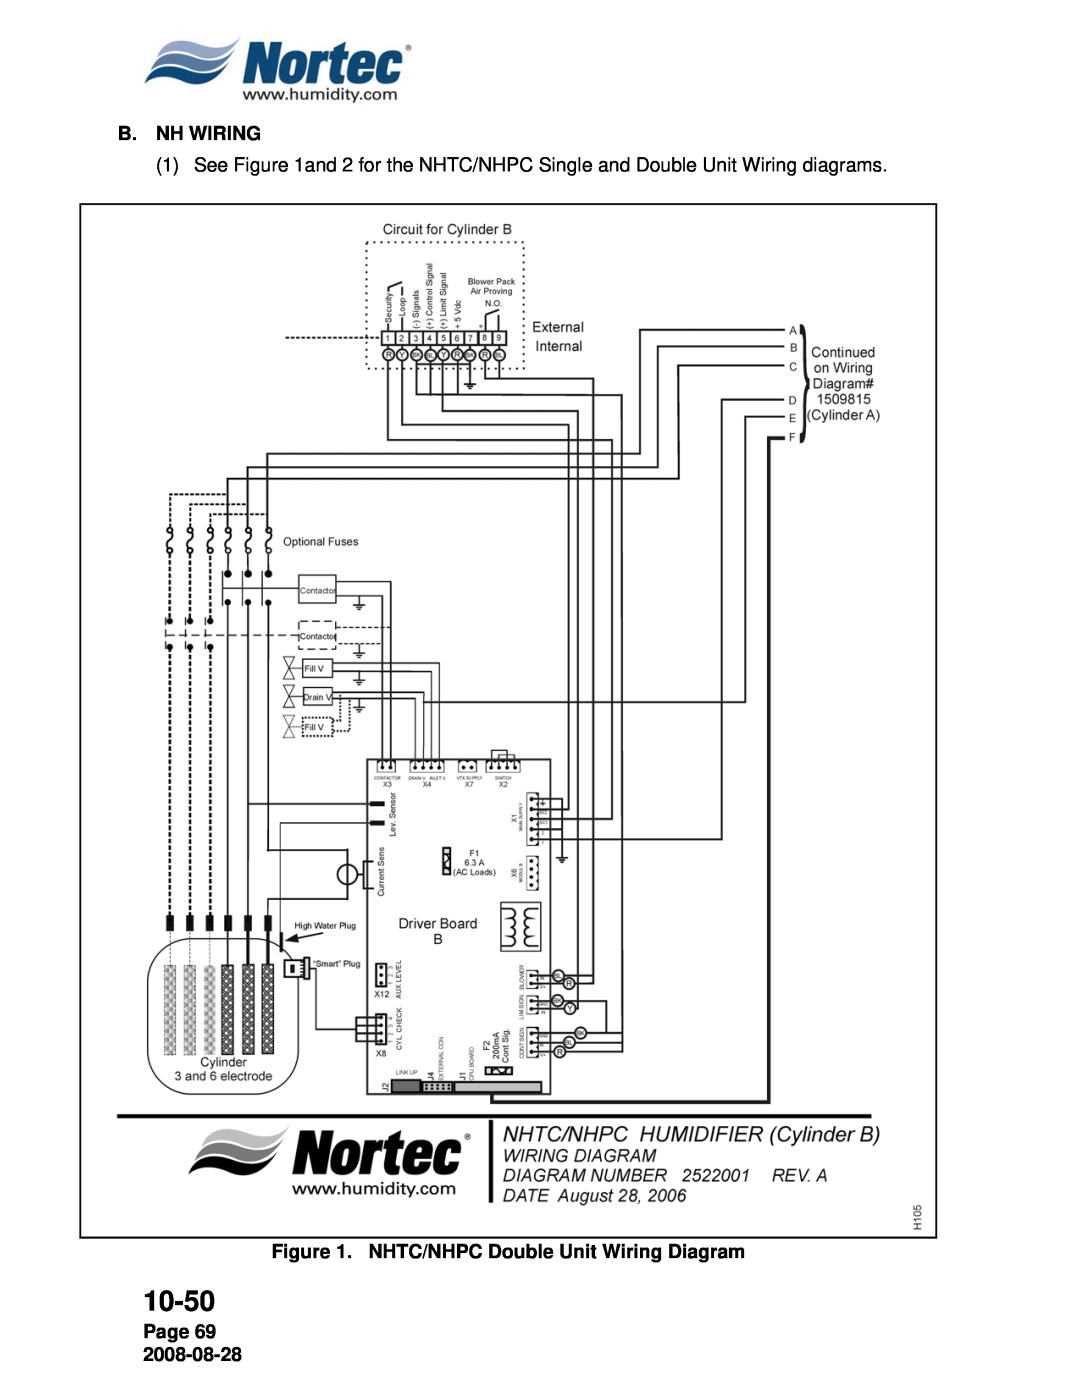 Nortec NH Series installation manual B.Nh Wiring, NHTC/NHPC Double Unit Wiring Diagram, Page 69, 10-50 